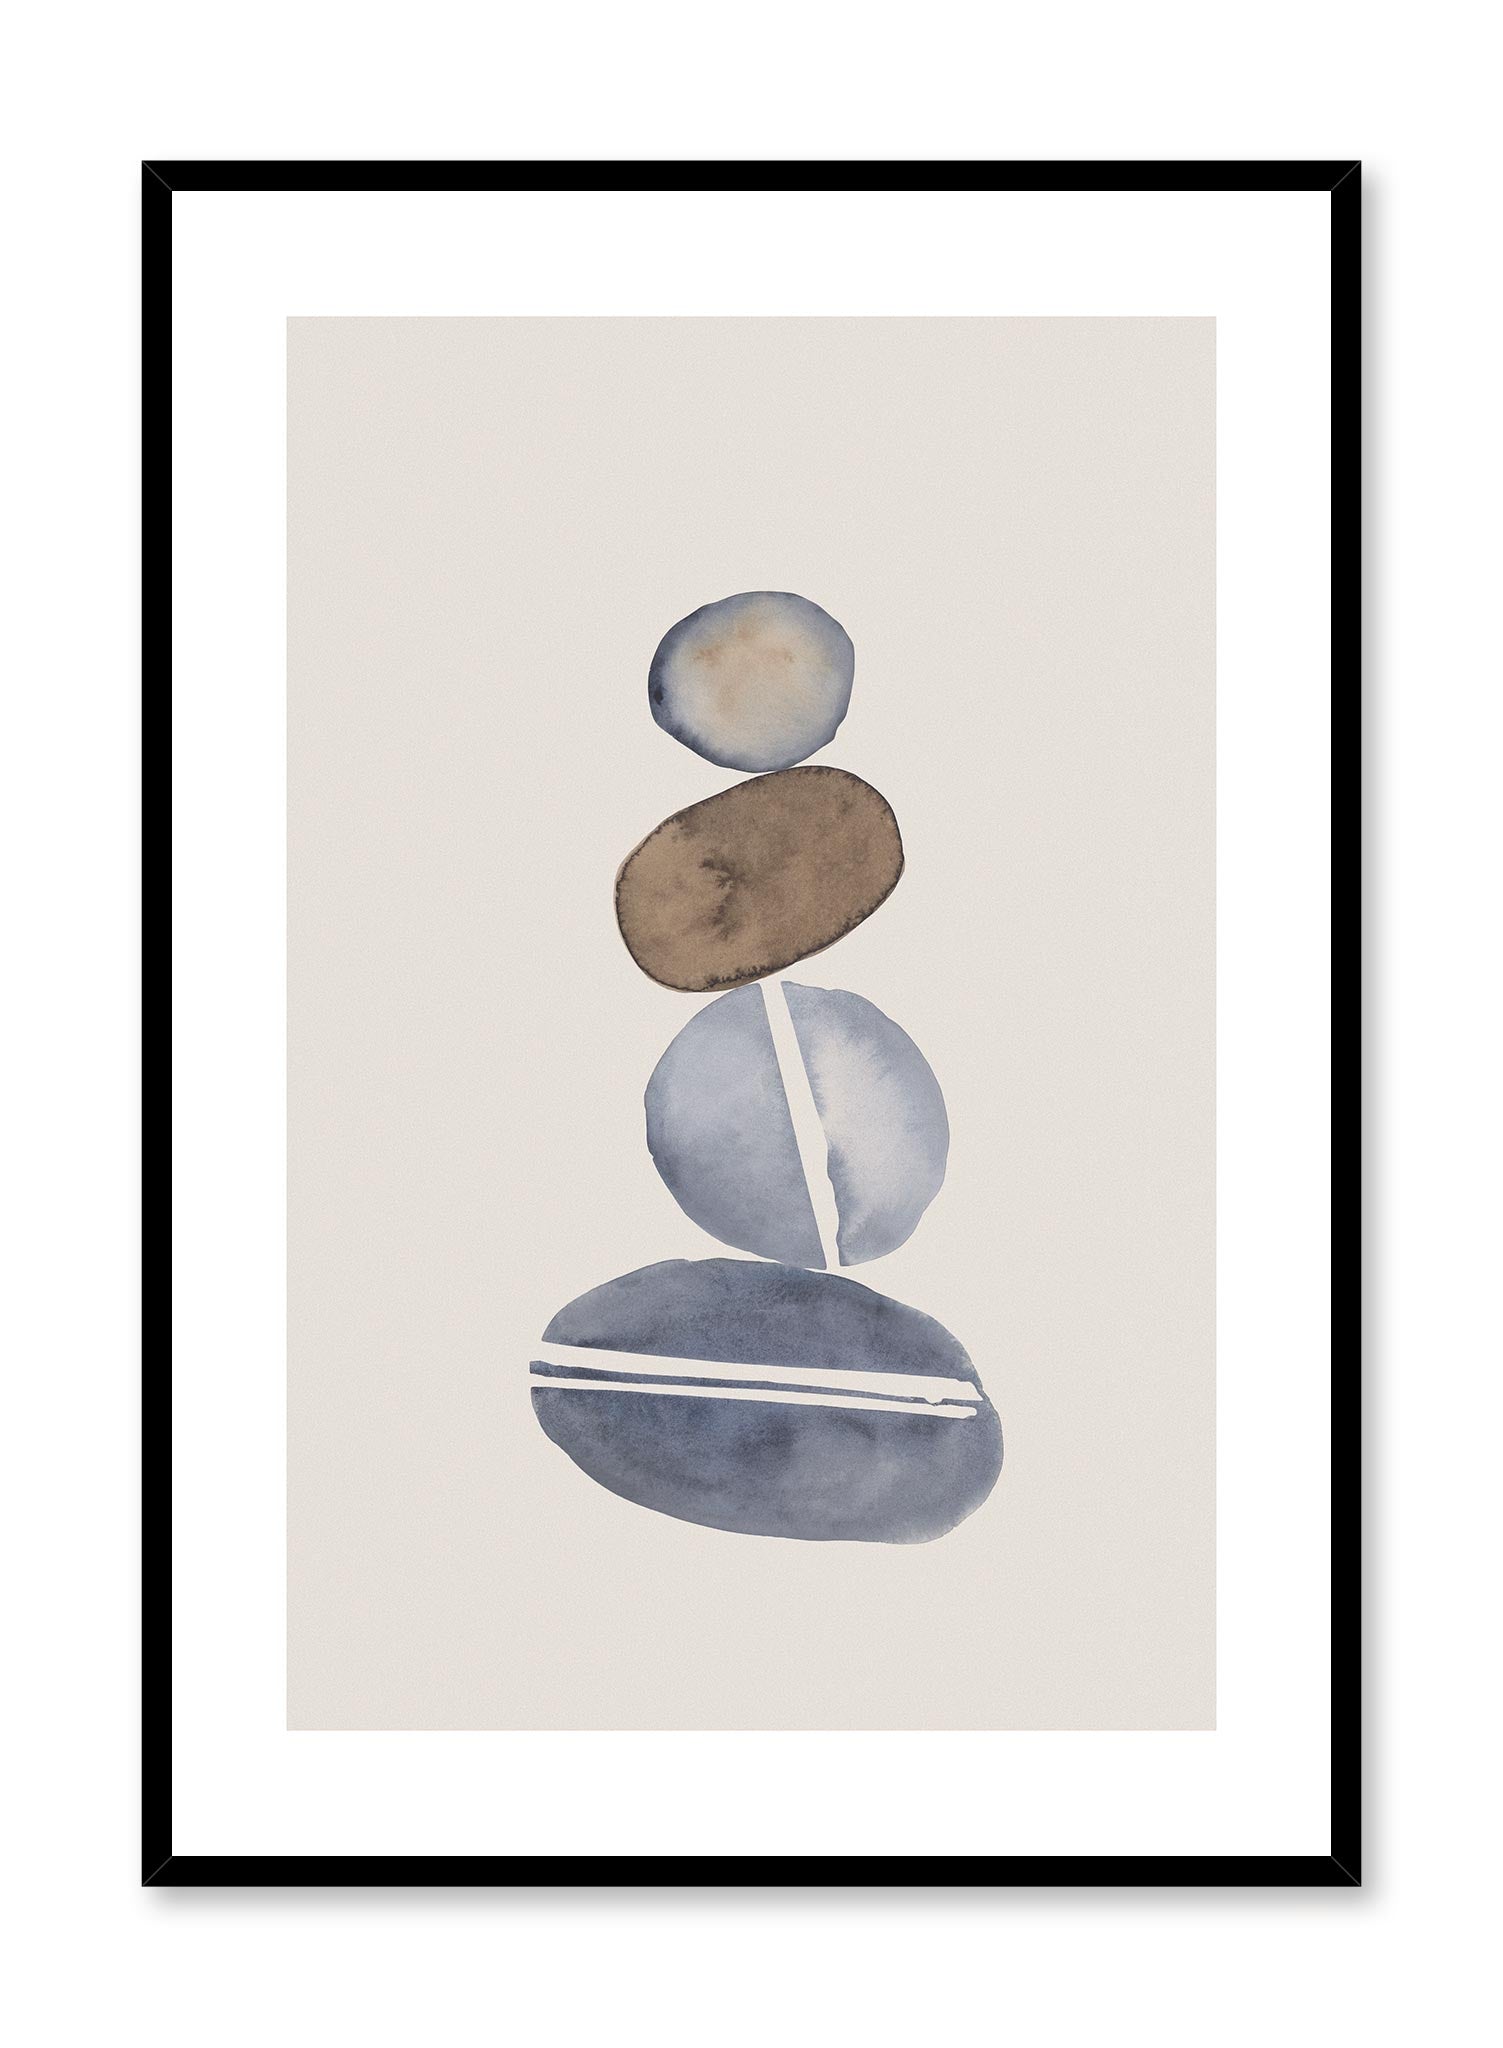 Stacked Stones is a minimalist illustration by Opposite Wall of four stacked stones of different styles and colours.